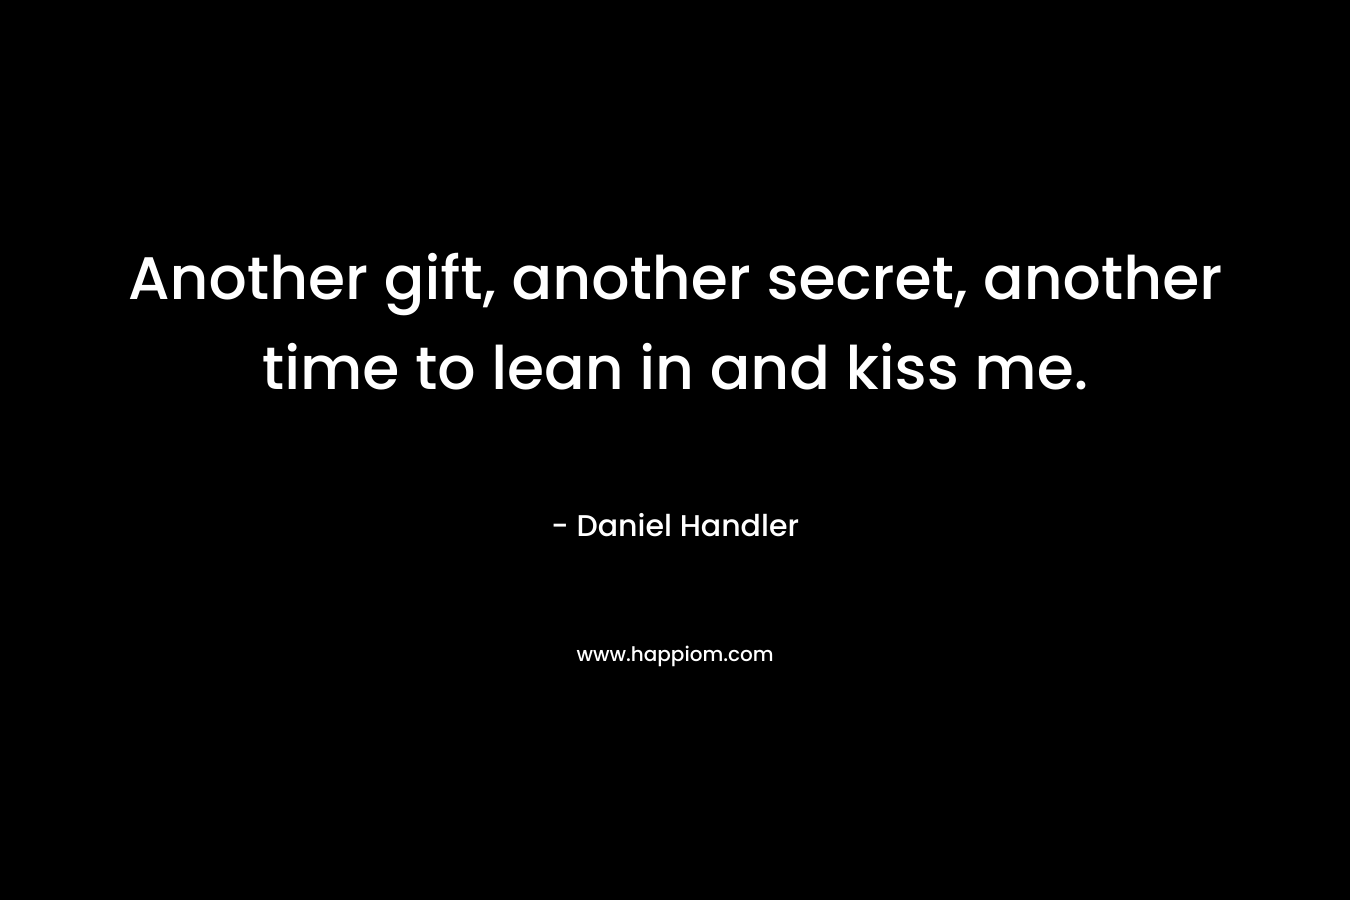 Another gift, another secret, another time to lean in and kiss me. – Daniel Handler